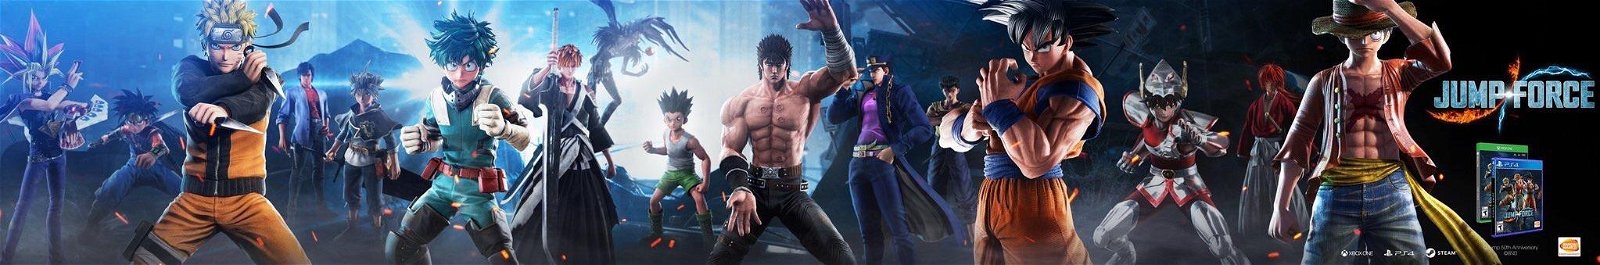 Jump Force, PlayStation 4, Xbox One, release date, gameplay, price, features, US, North America, Europe, update, news, new characters, advertisement leak, JoJo’s Bizarre Adventure, Dragon Quest, Jotaro Kujo, Dai